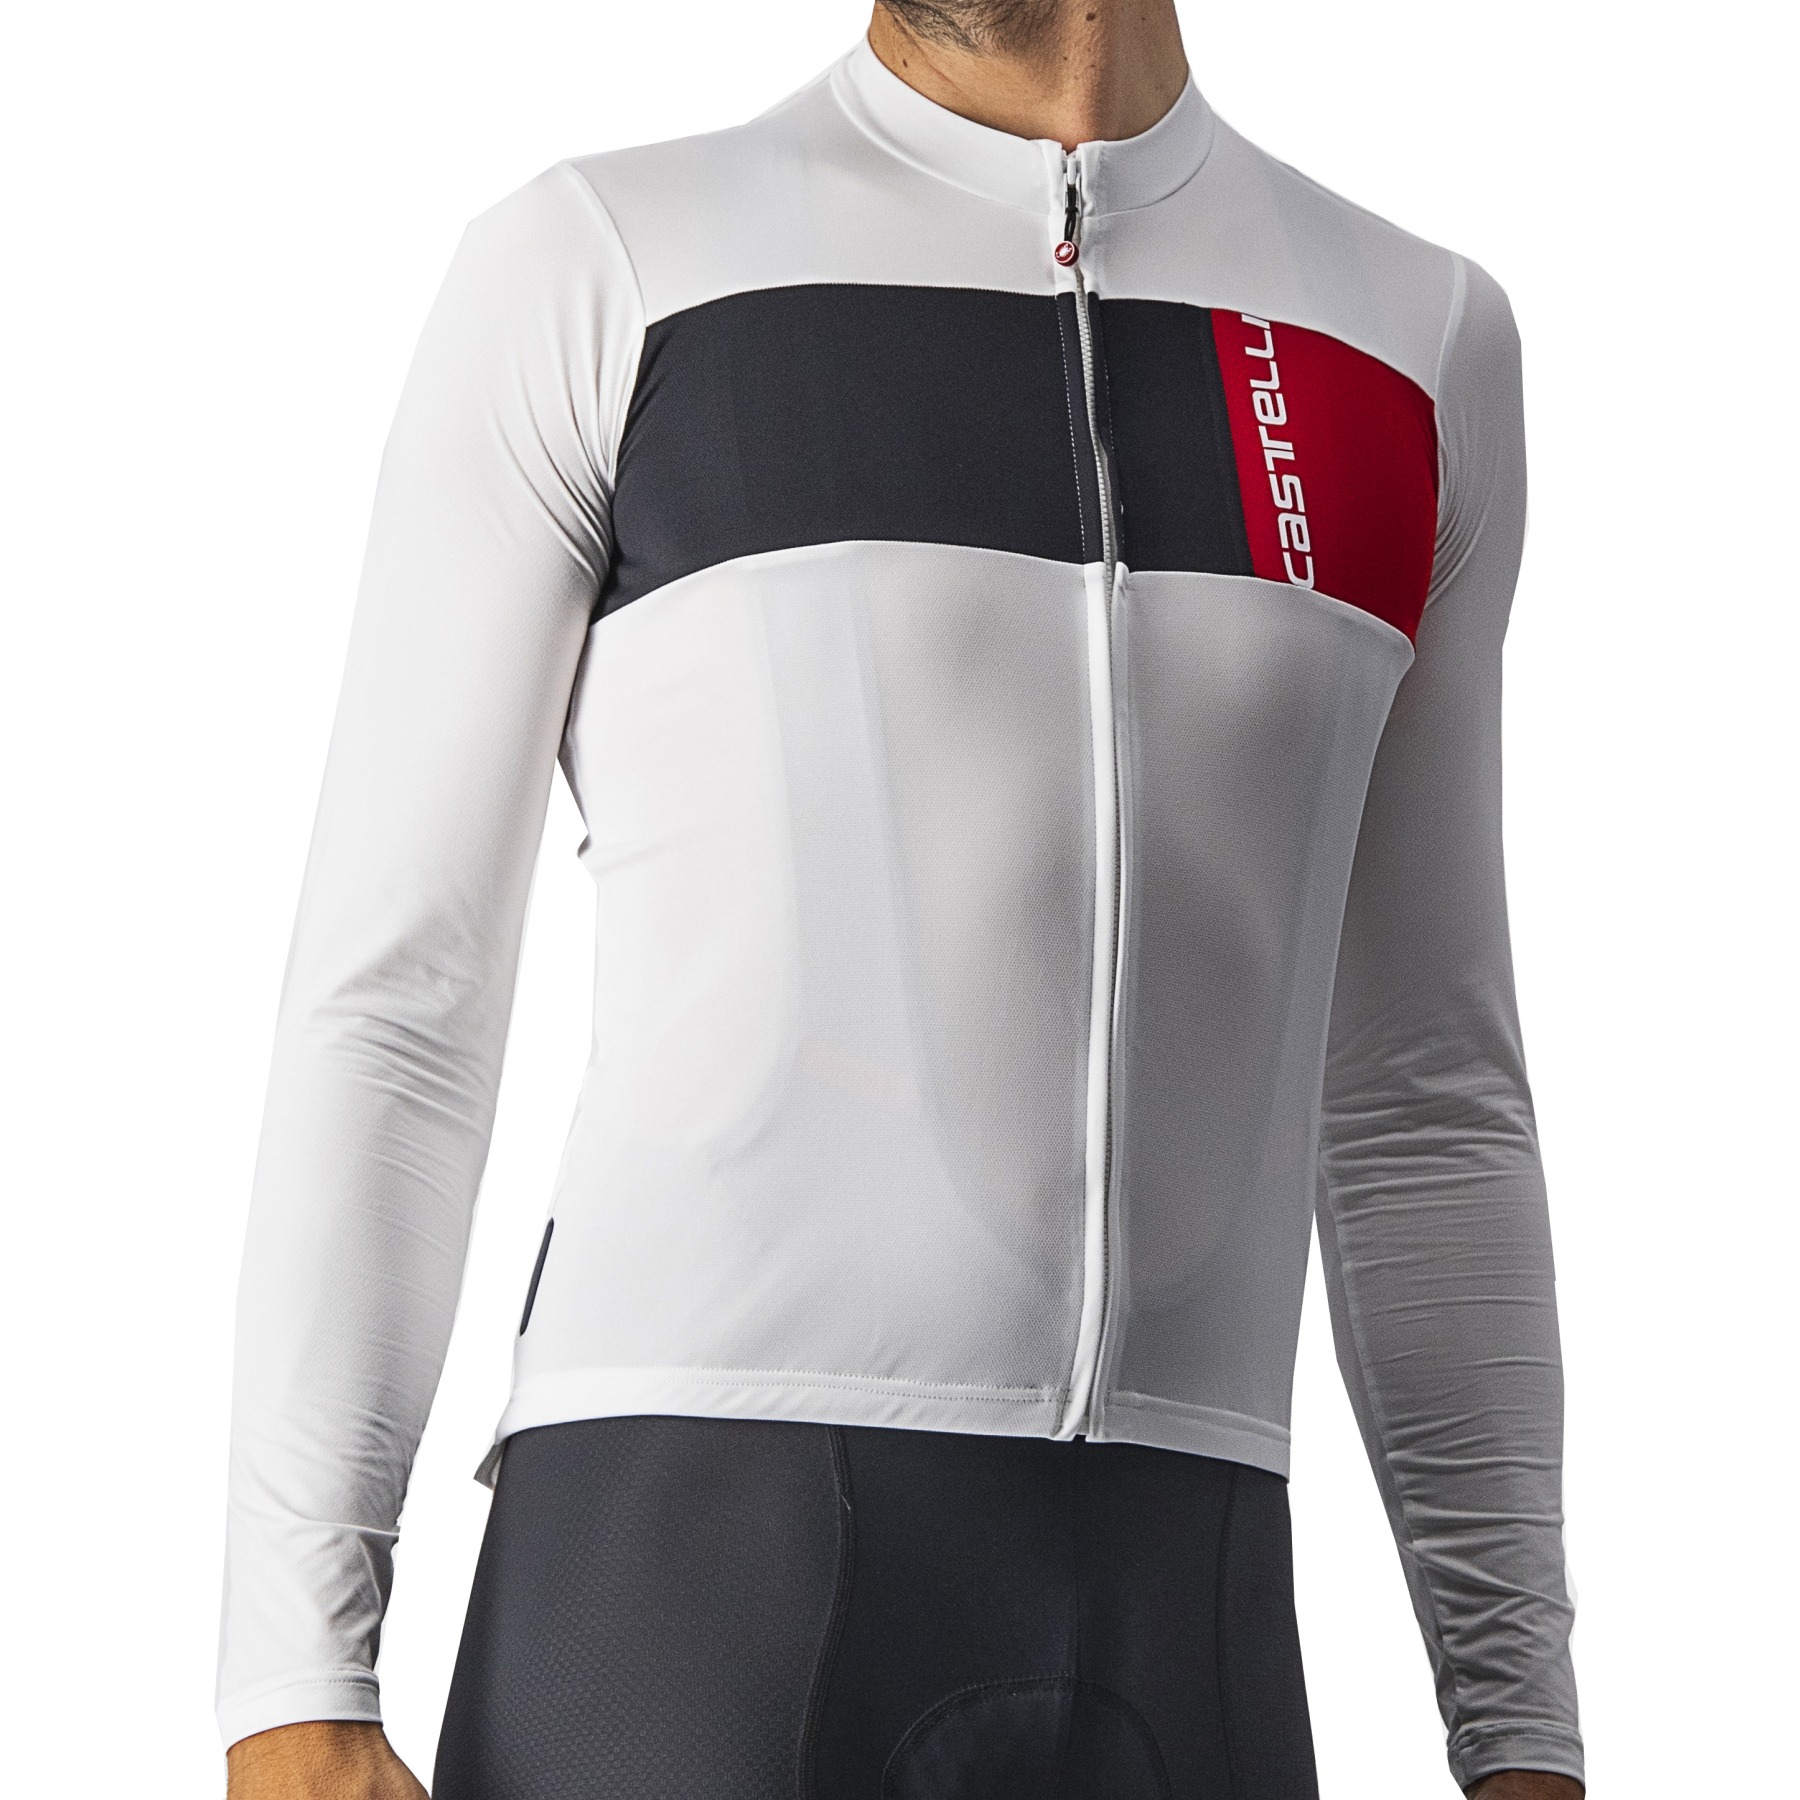 Picture of Castelli Prologo 7 Long Sleeve Jersey - ivory/light black-red 065